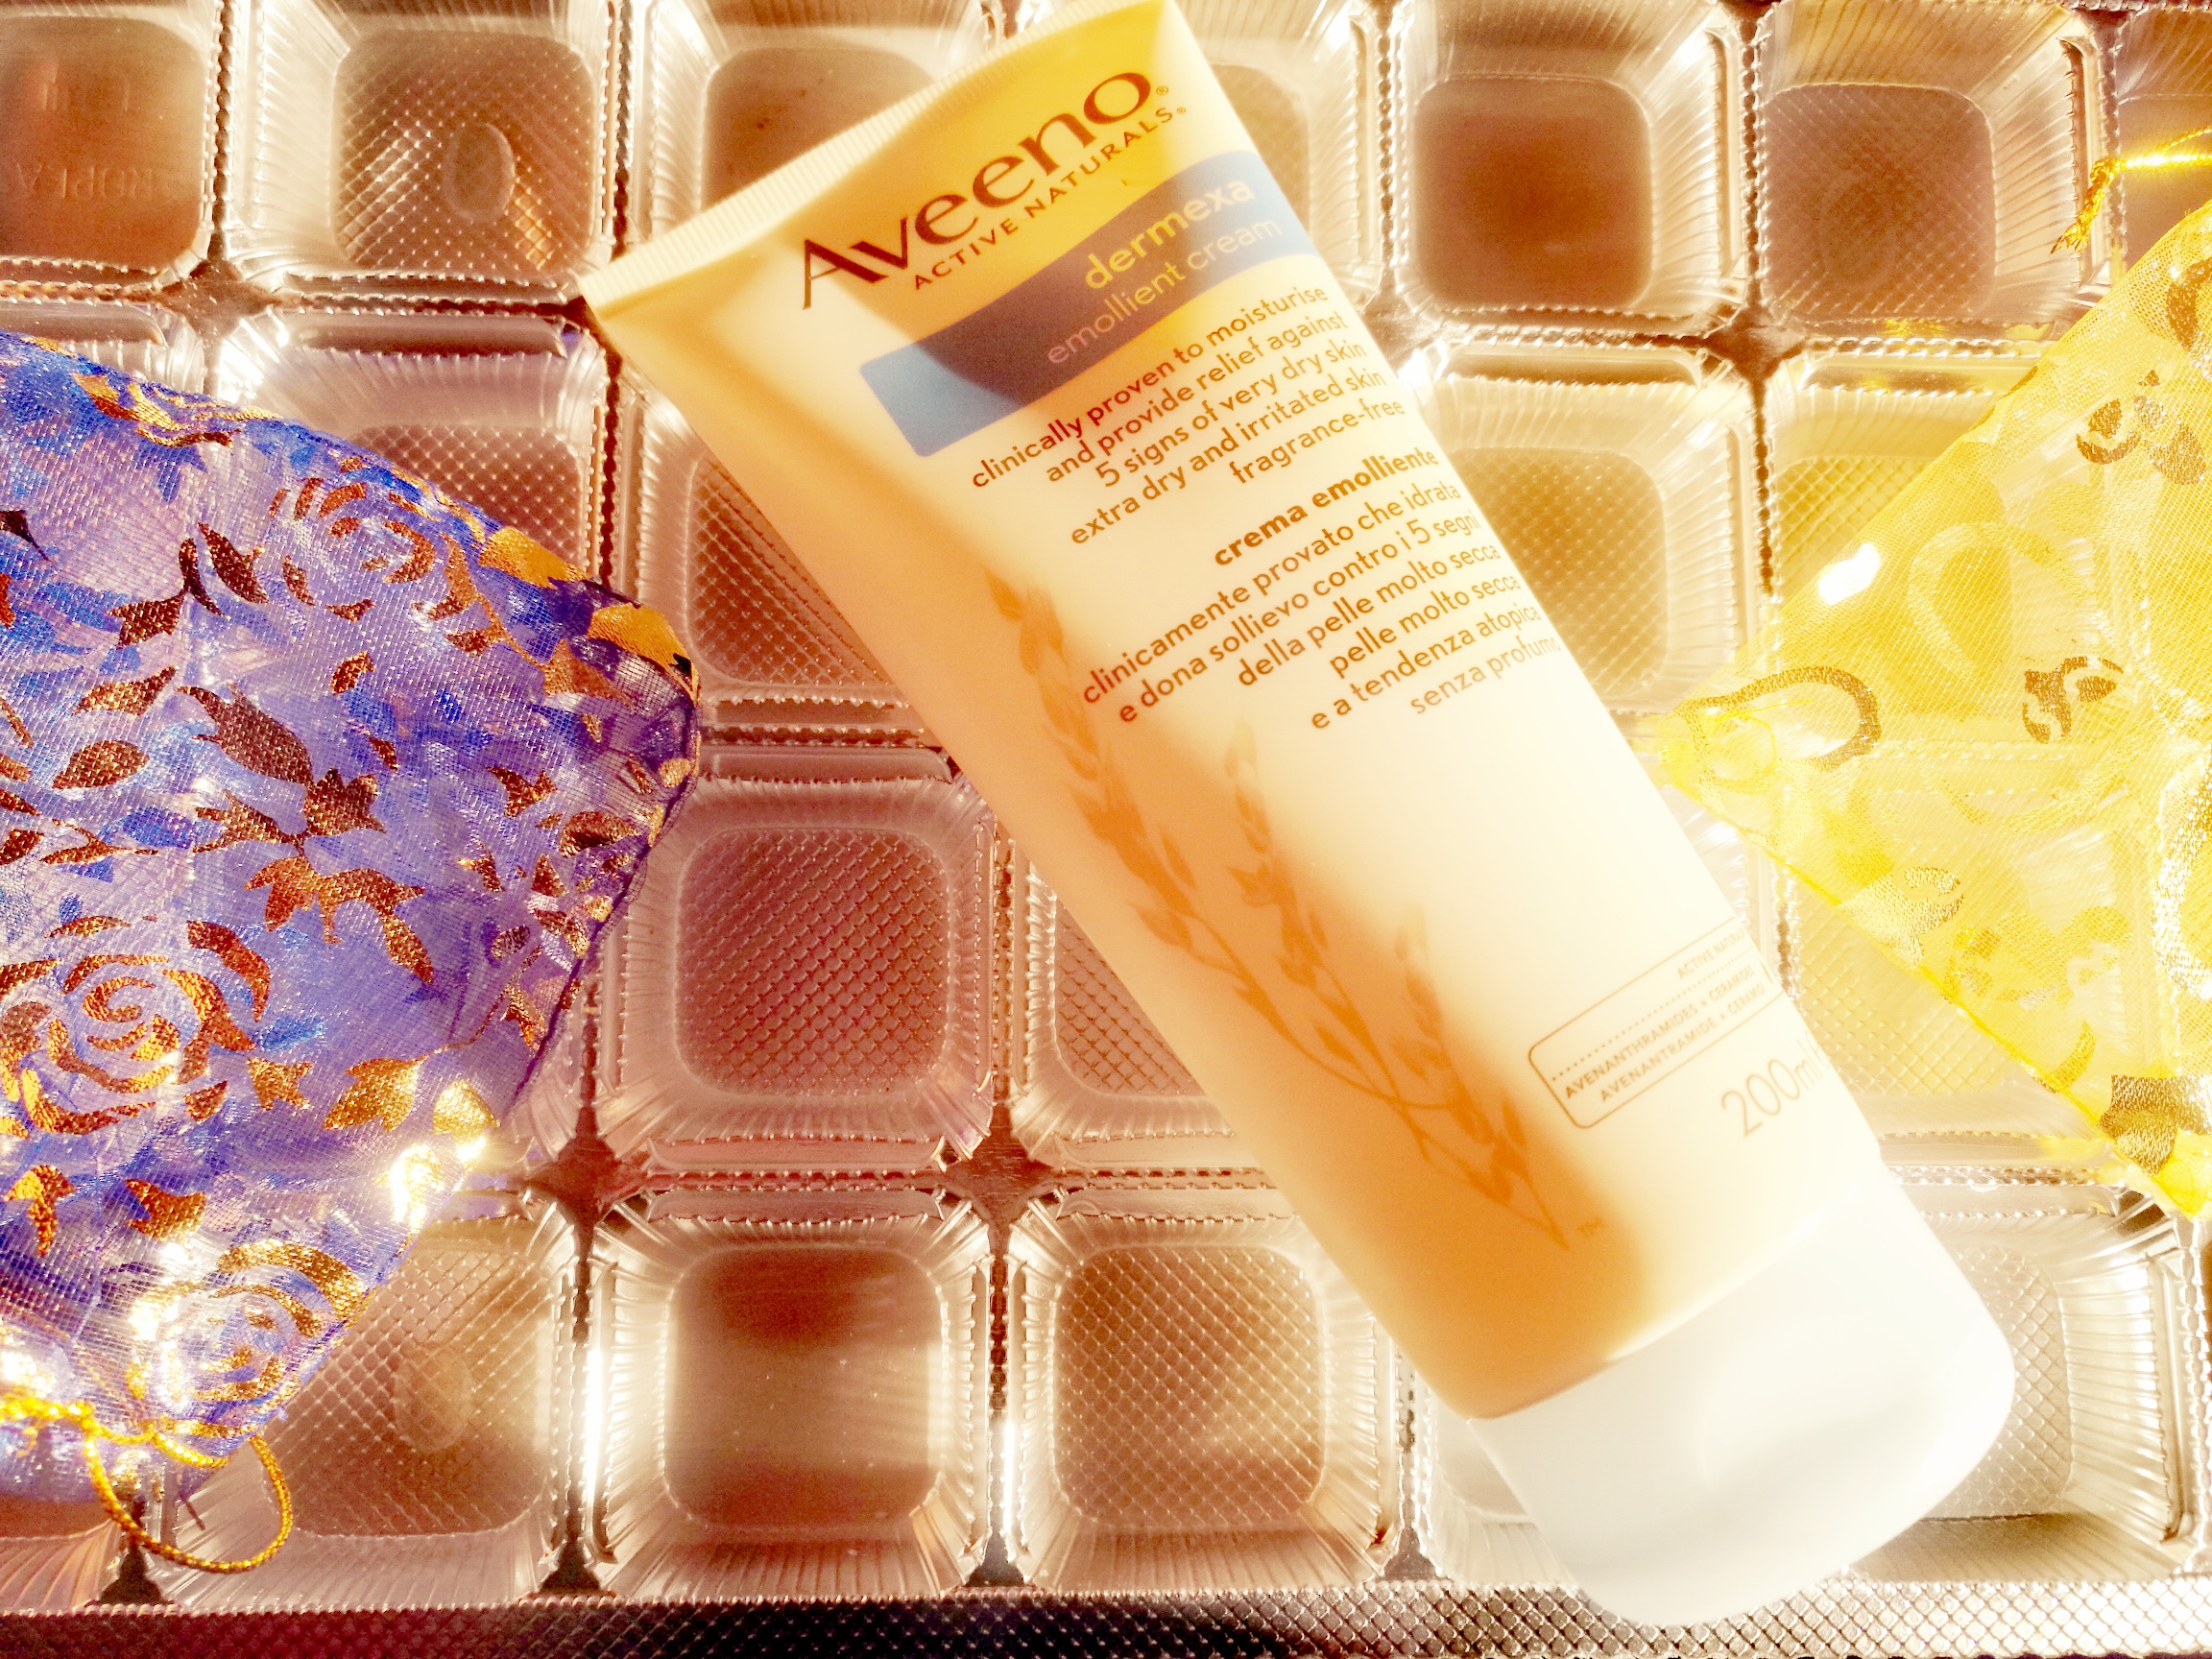 How Great Is Aveeno Lotion For Eczema?